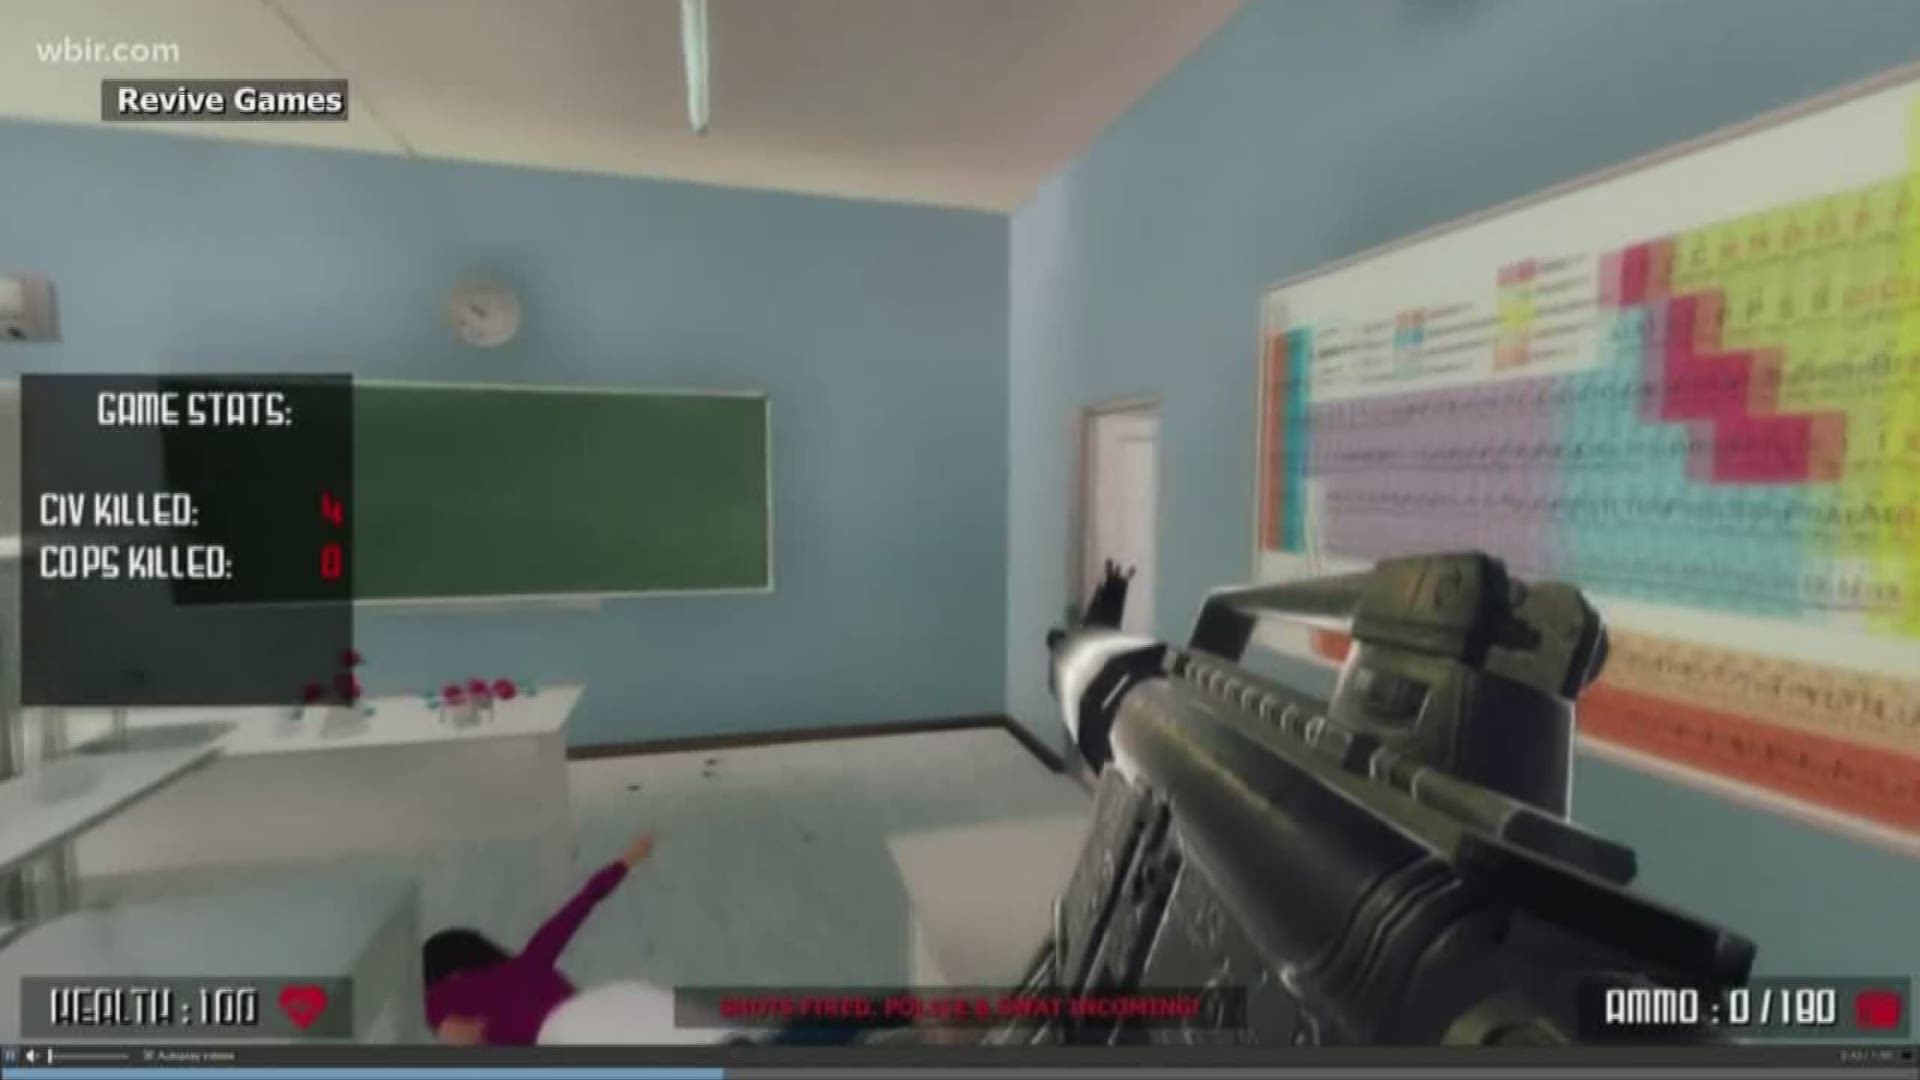 A game that focuses on a school shooting and gives players the option of being the shooter is raising concerns among experts. May 25, 2018